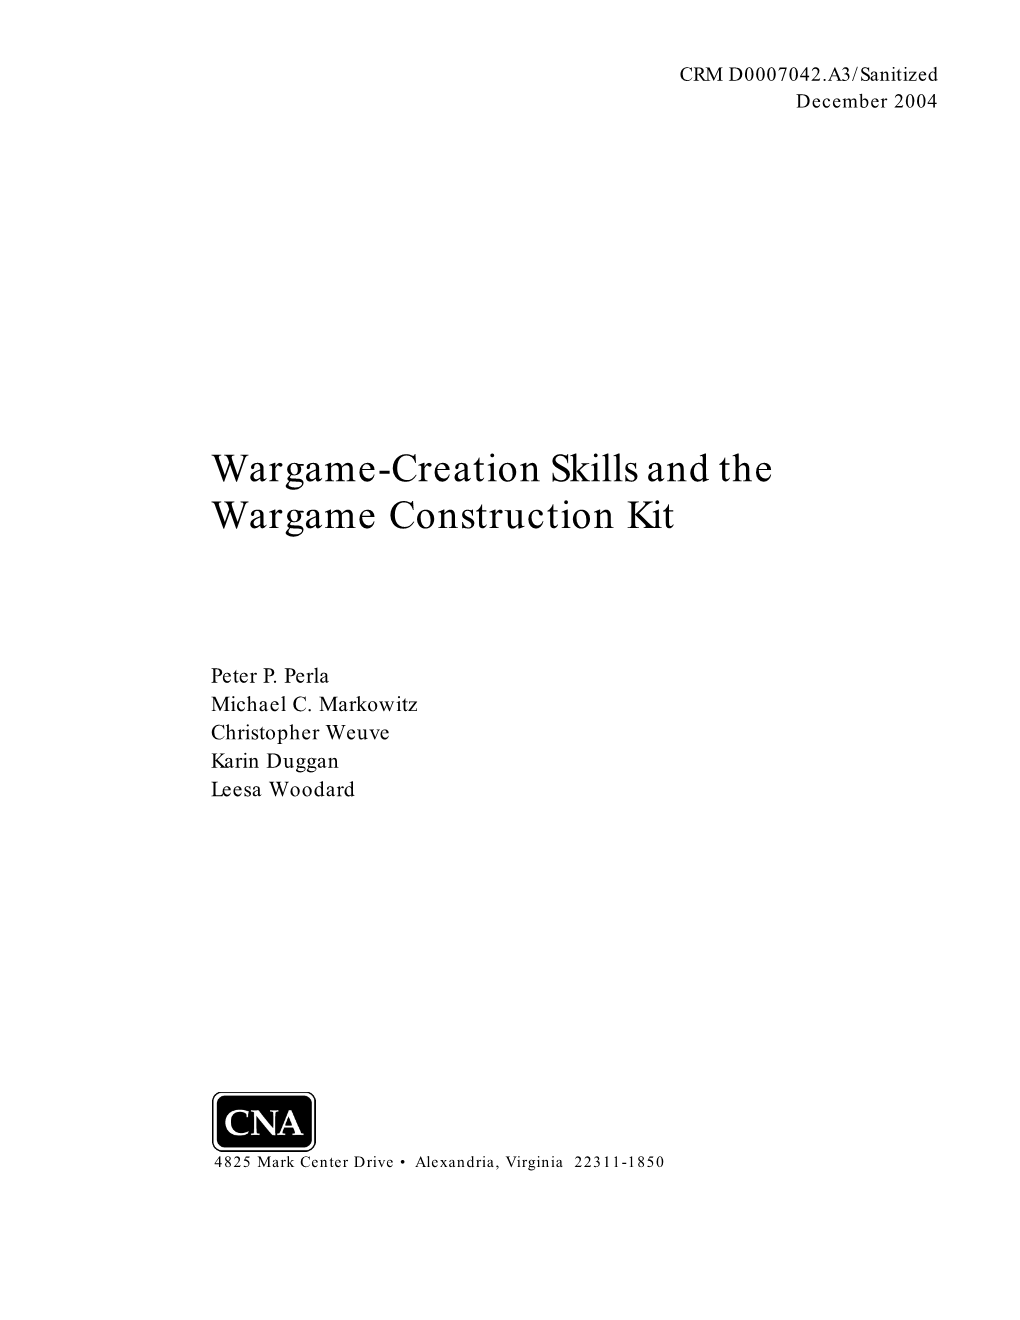 Wargame-Creation Skills and the Wargame Construction Kit